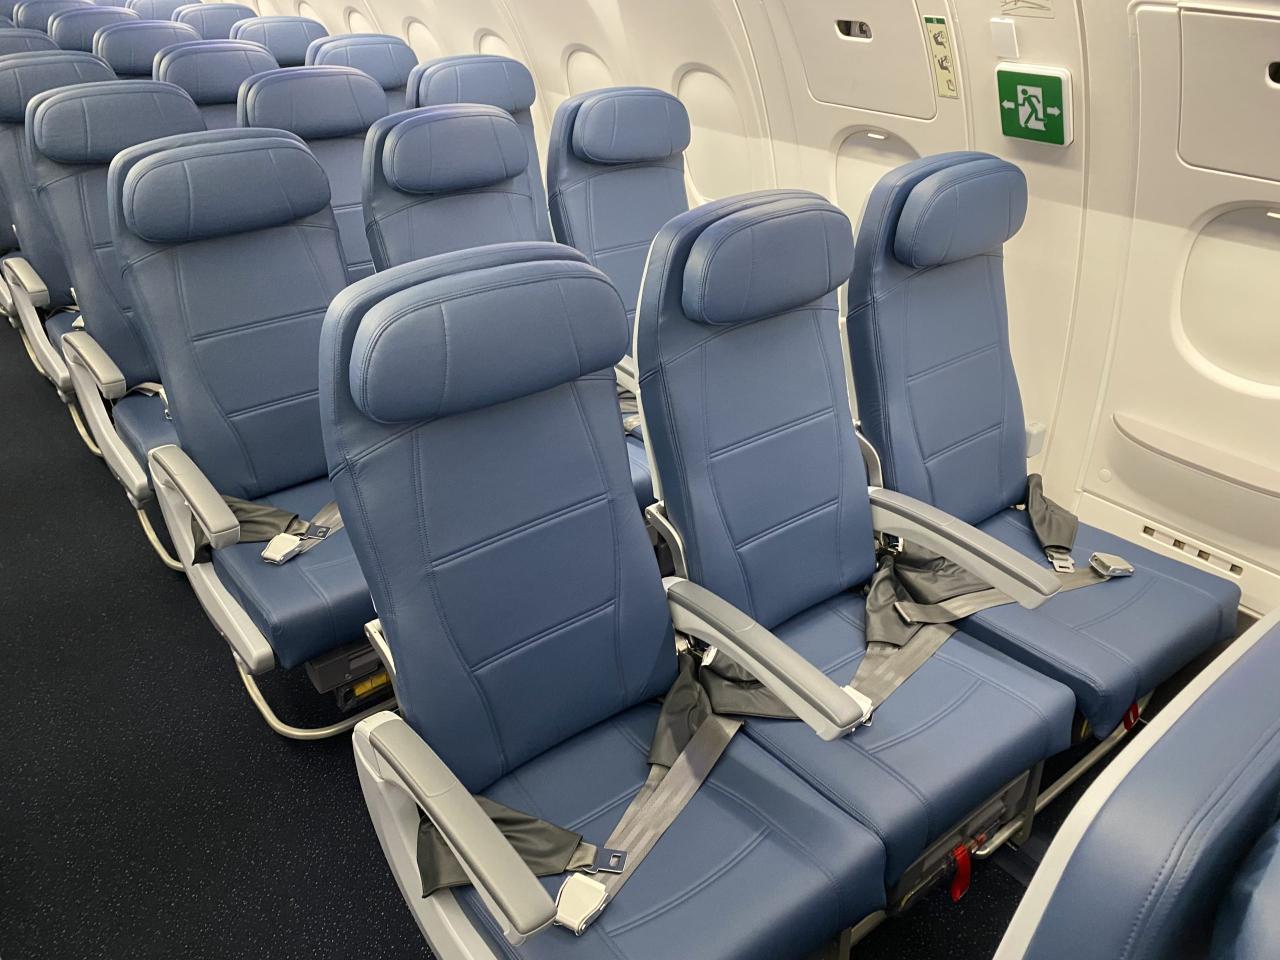 Delta-A321neo-first-class-main-cabin - Eye of the Flyer